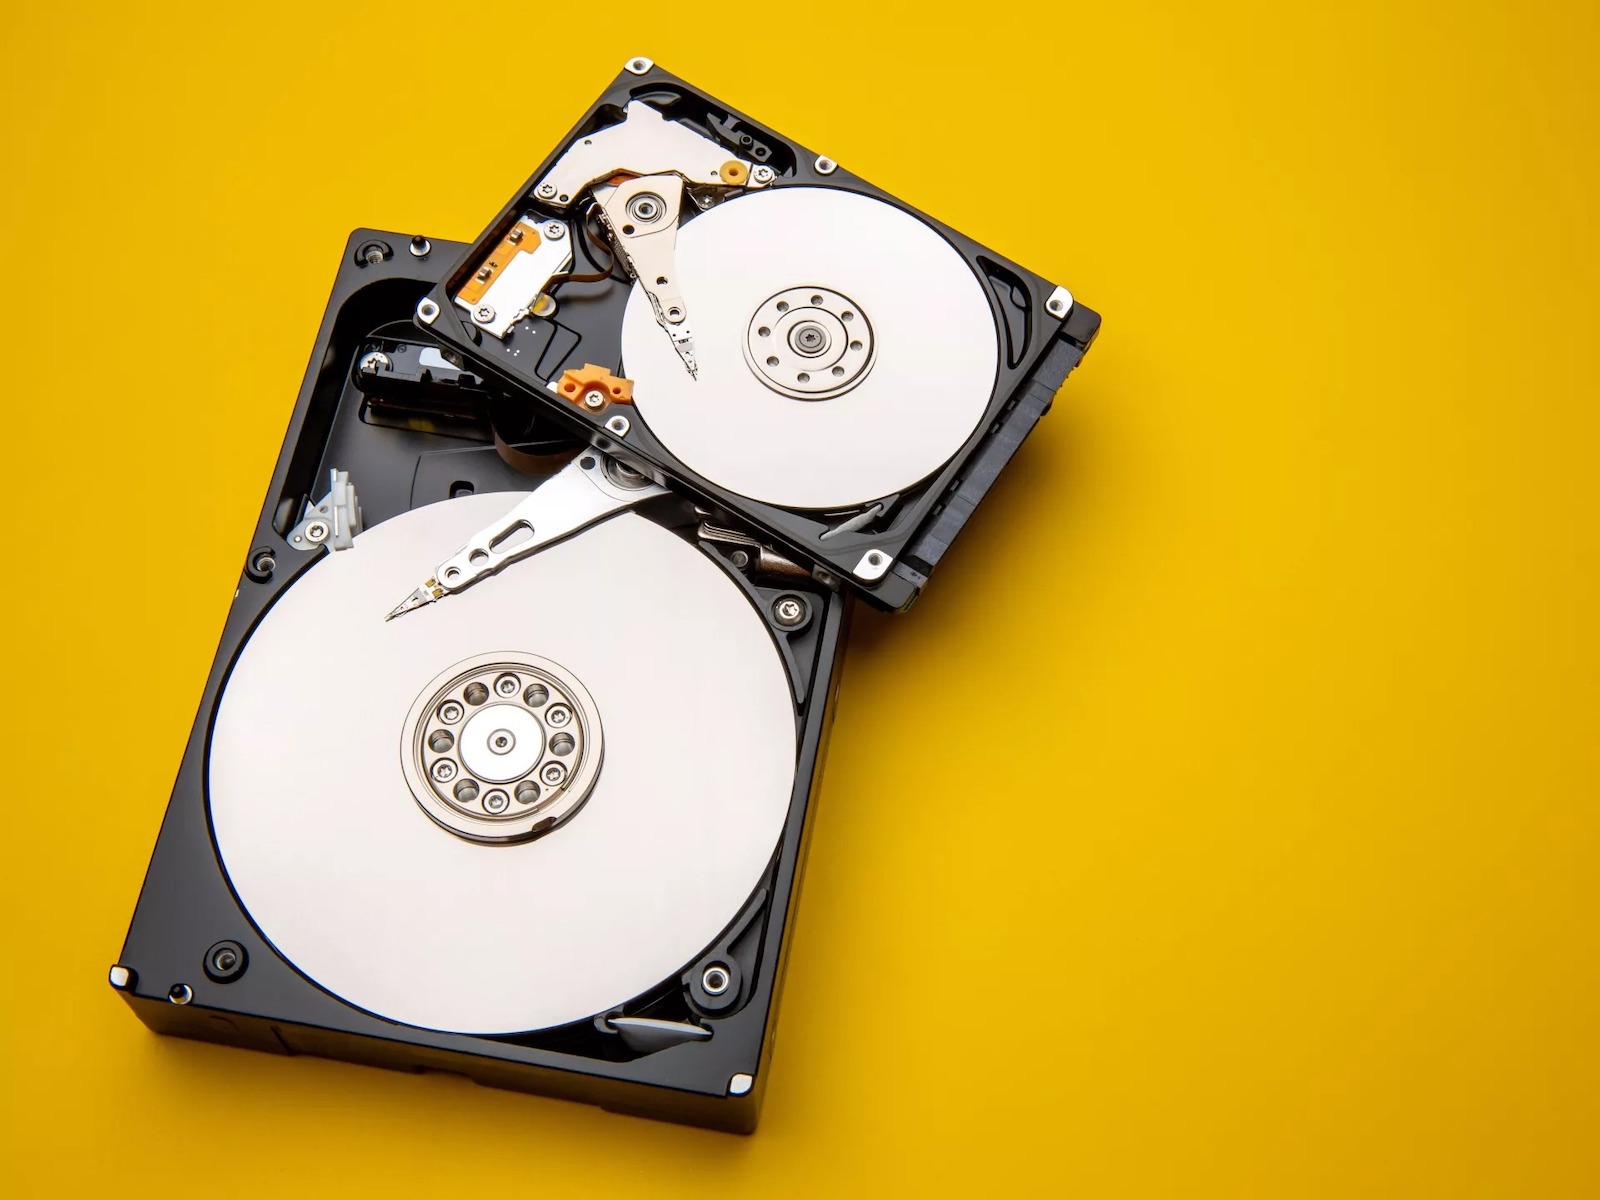 Hard drive shipments nearly halved in 2022 – SSD